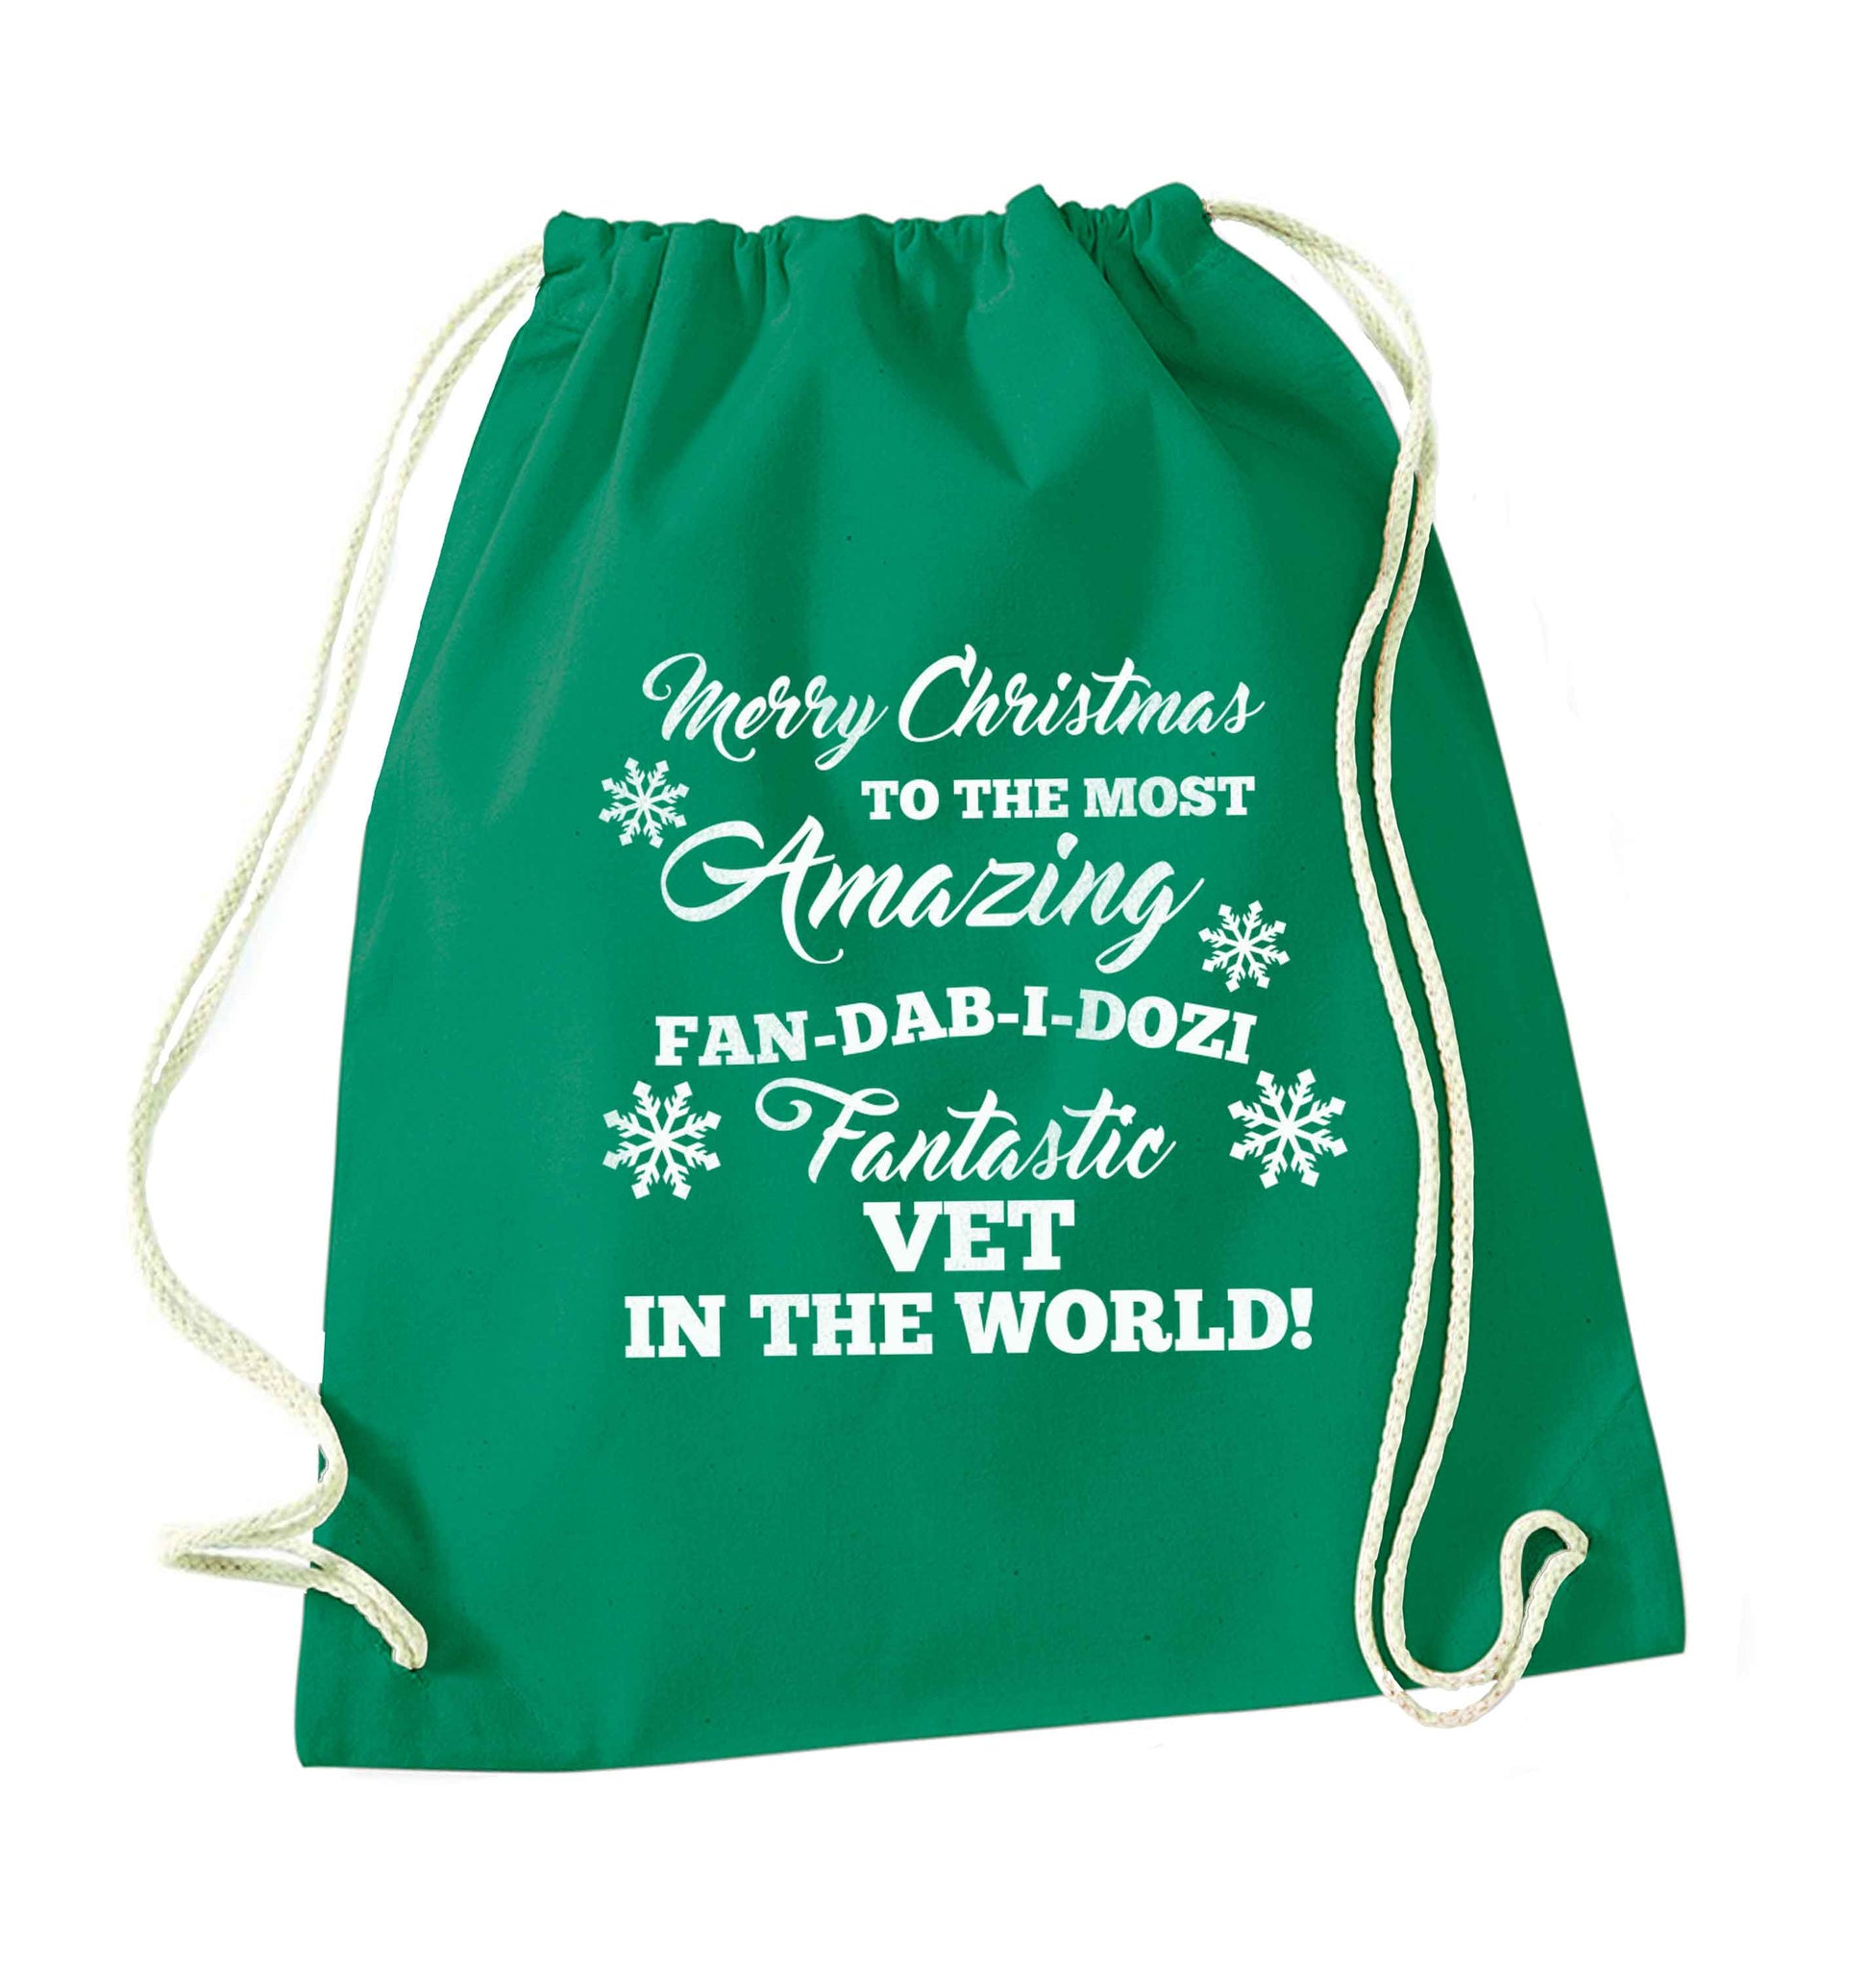 Merry Christmas to the most amazing vet in the world! green drawstring bag